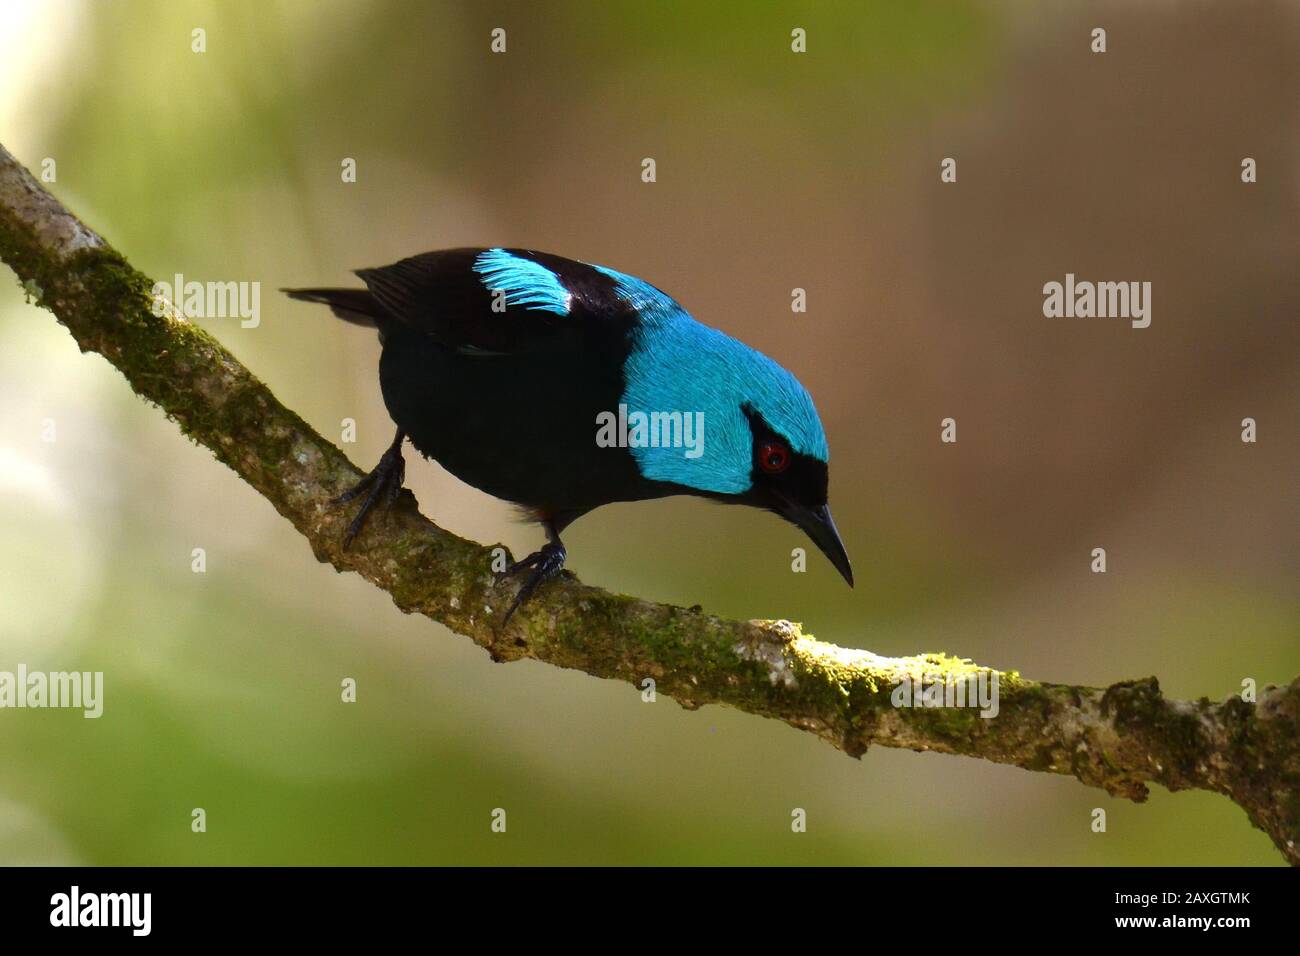 A Scarlet-thighed Dacnis in Costa Rica rainforest Stock Photo